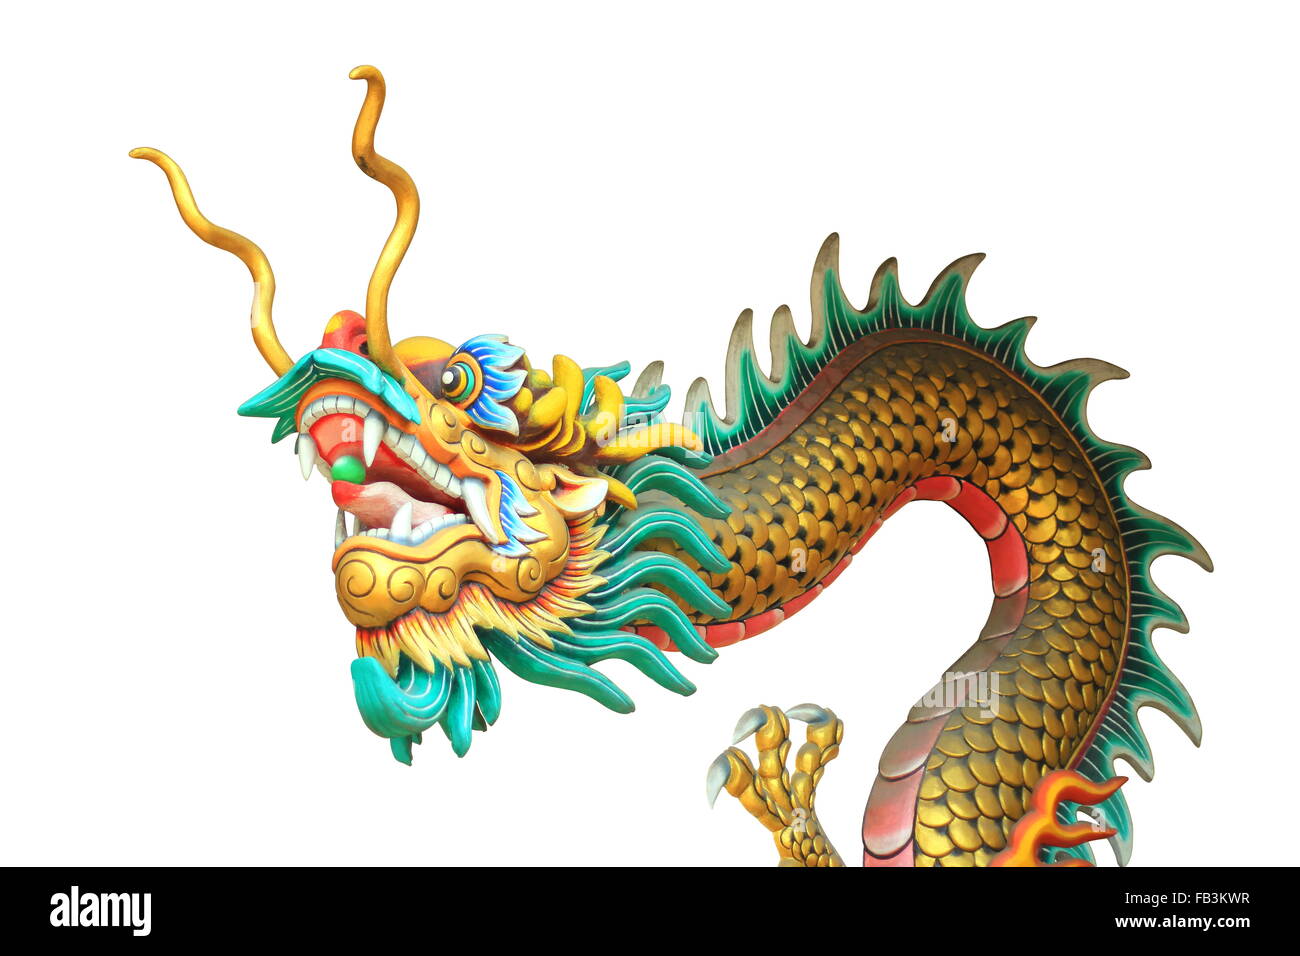 china dragon head and body statue isolated on white background Stock Photo